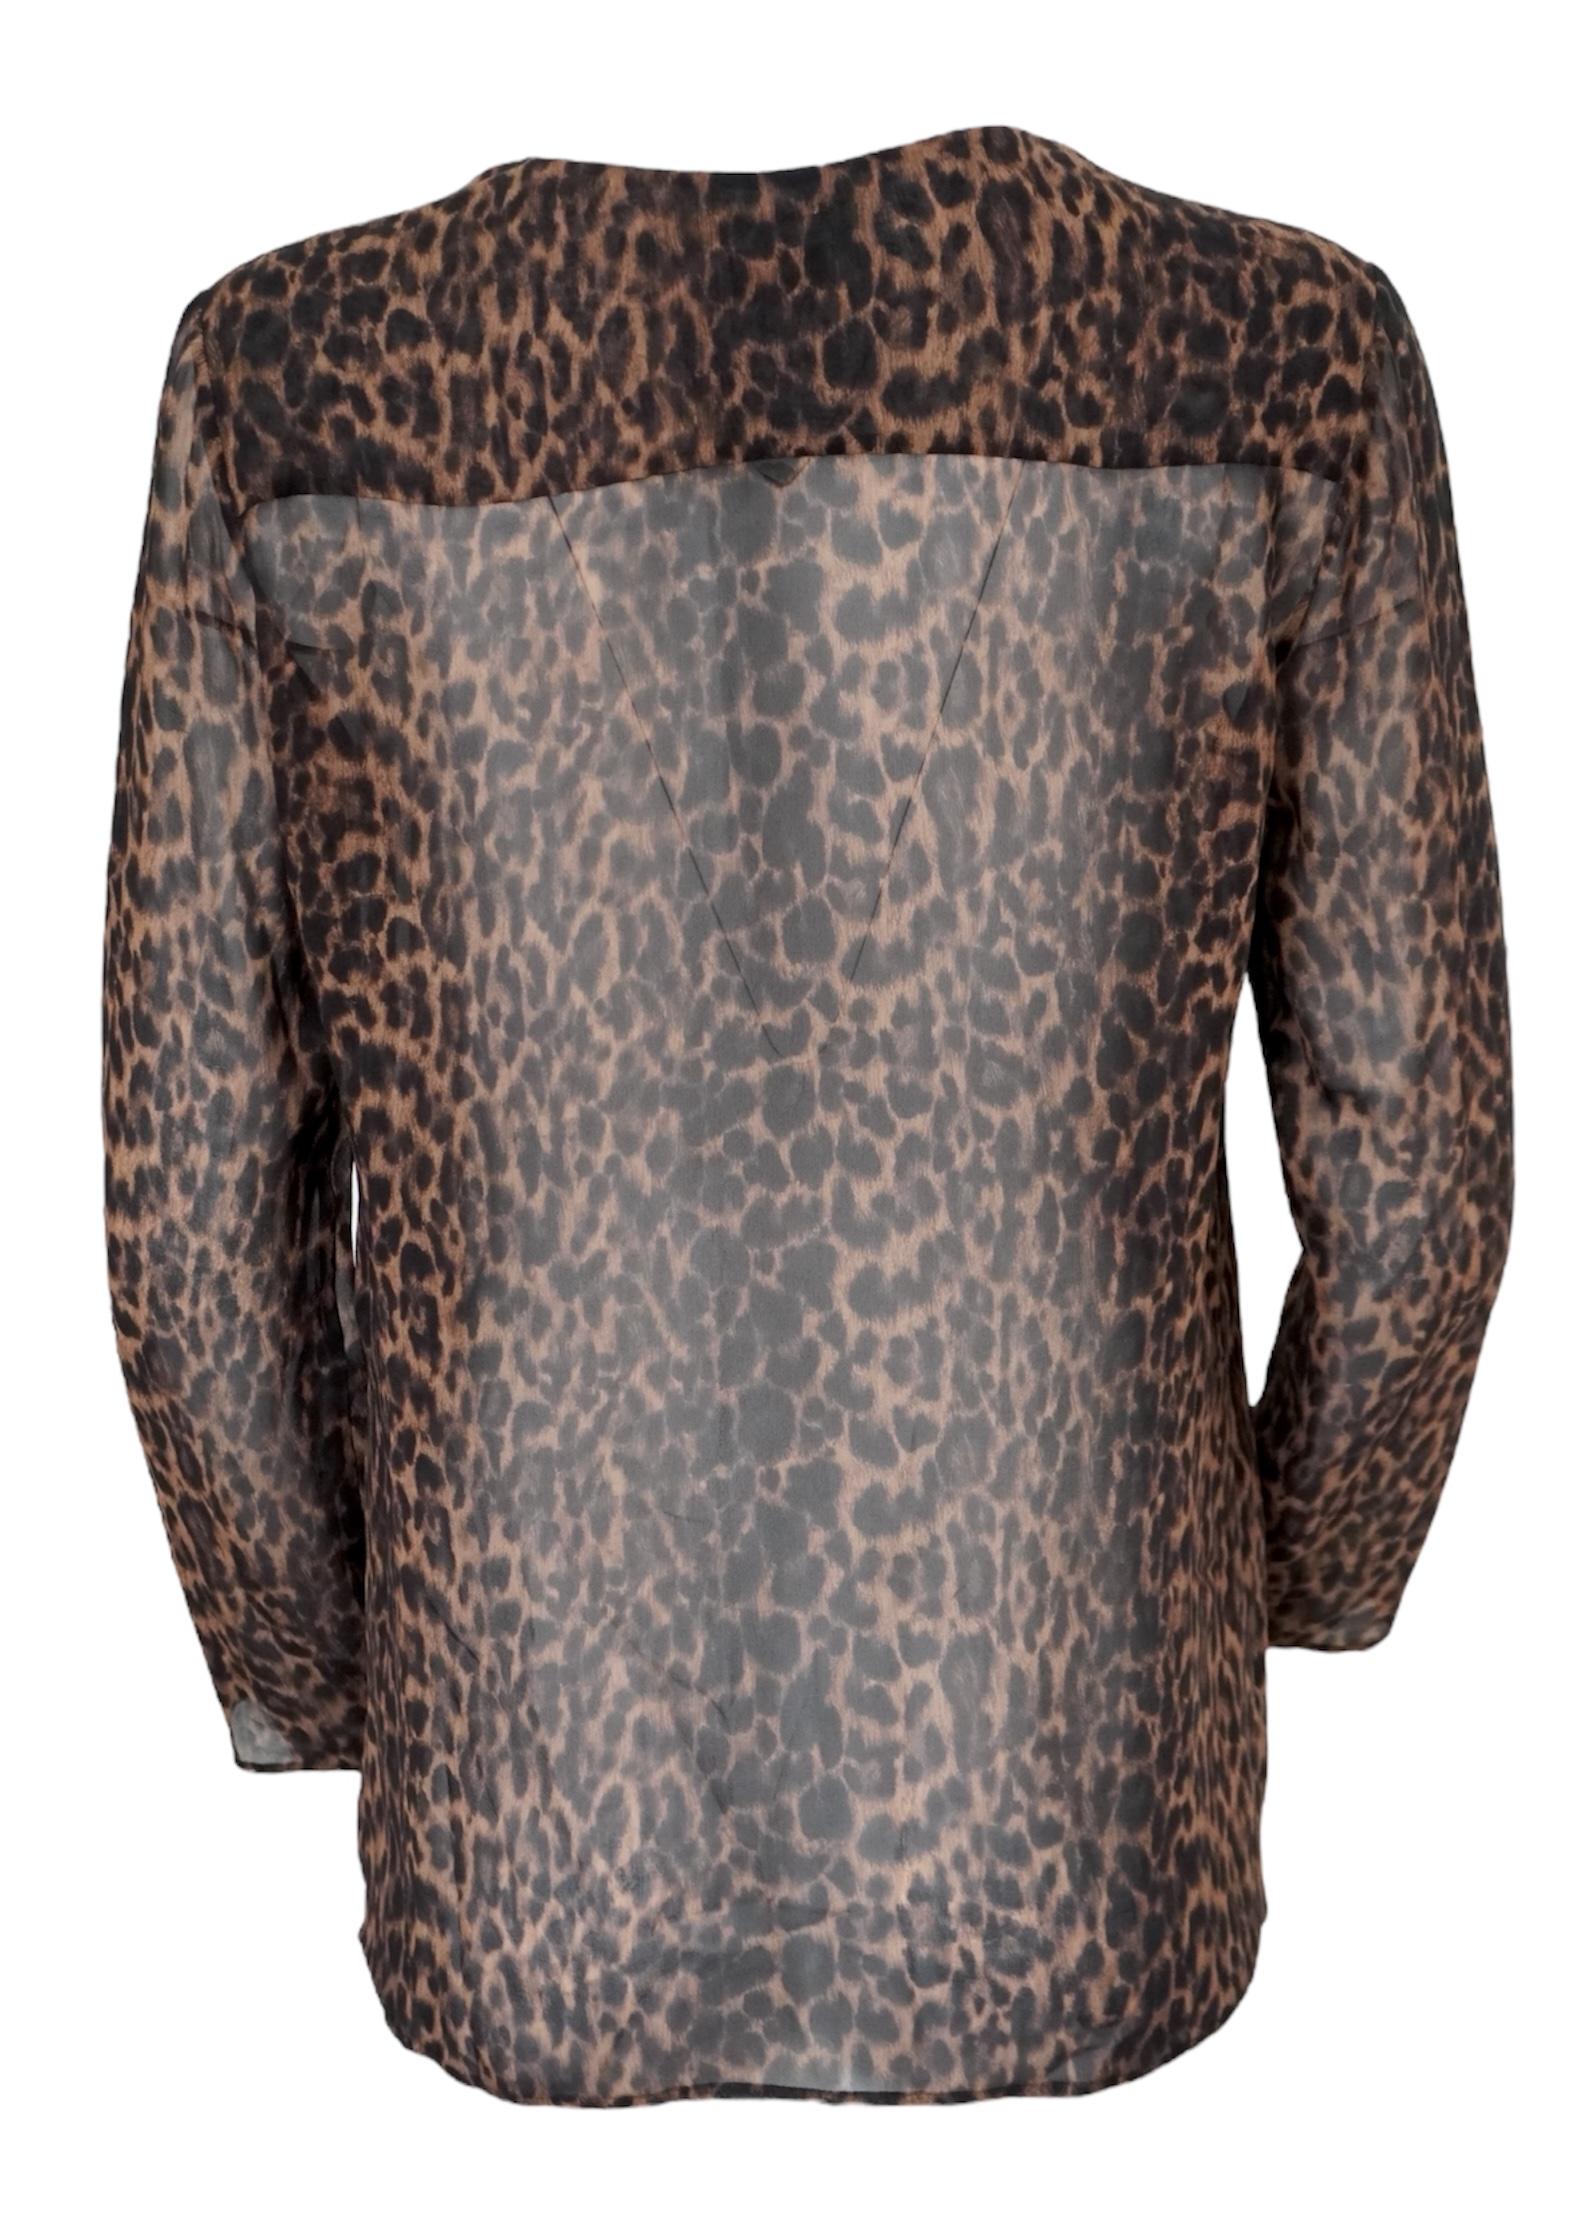 Saint Laurent Silk Sheer Leopard Buttoned Top In Good Condition For Sale In Beverly Hills, CA